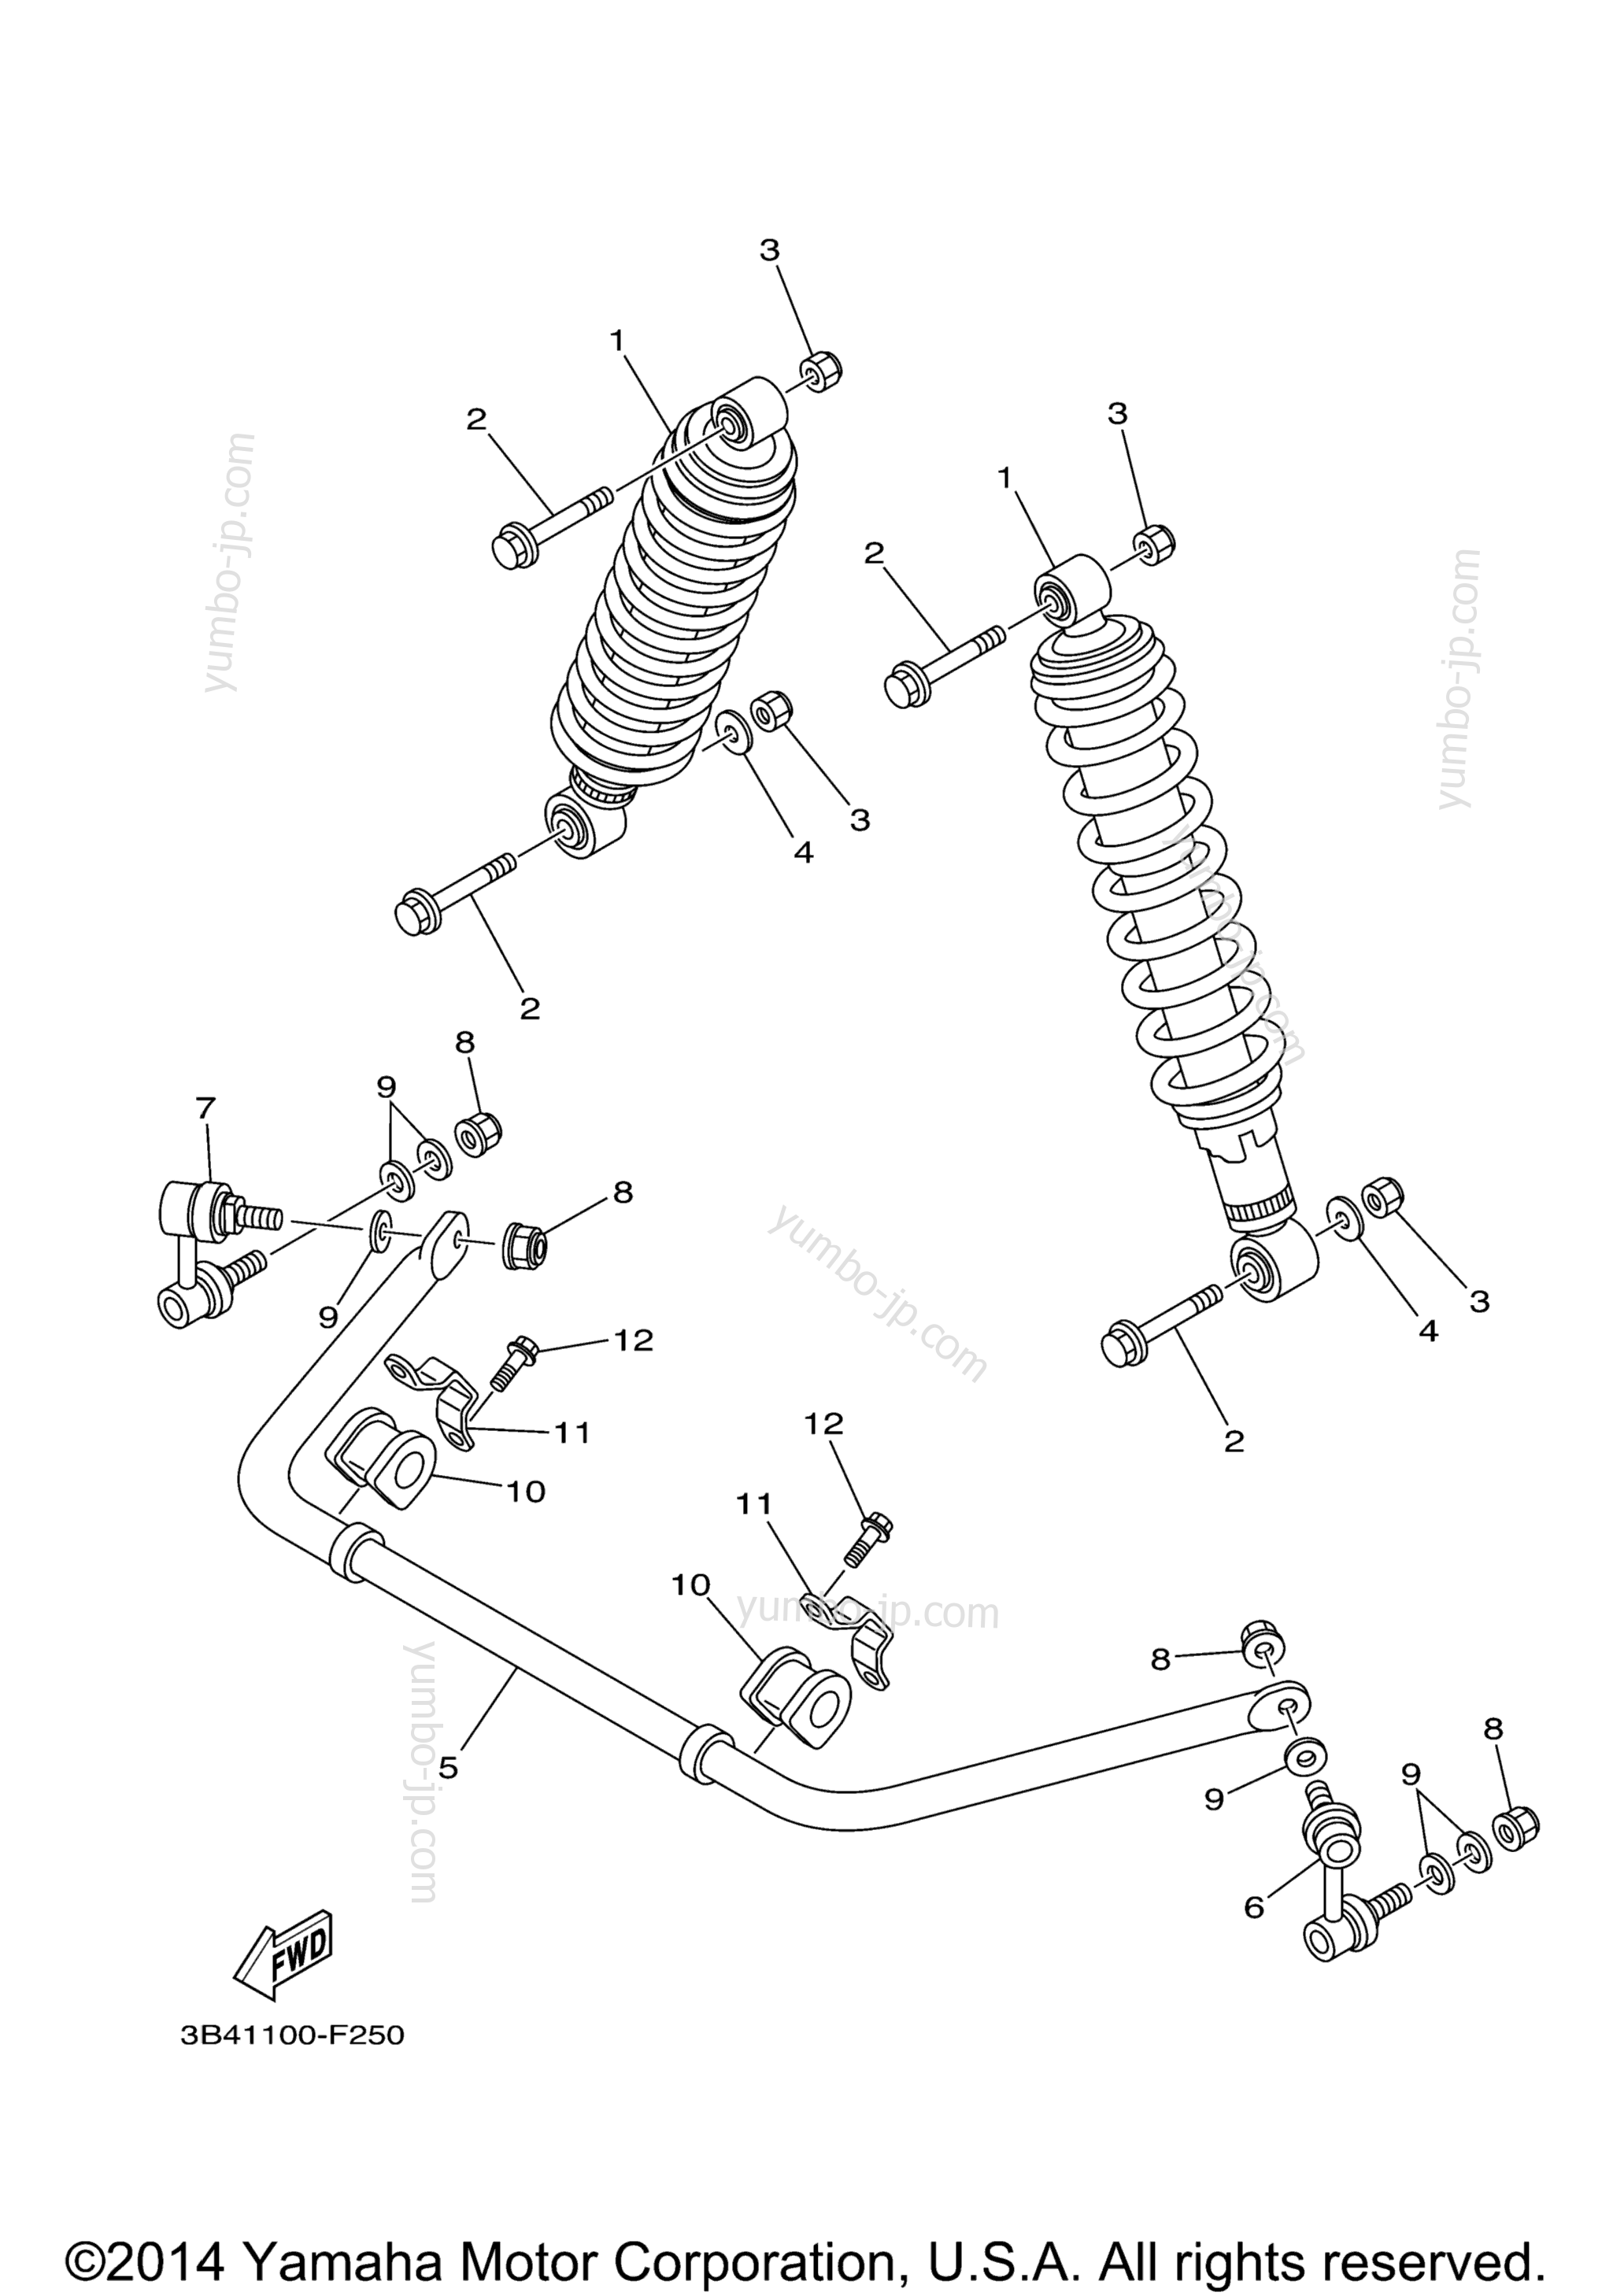 Rear Suspension for ATVs YAMAHA GRIZZLY 550 4WD (YFM5FGAGR) 2011 year